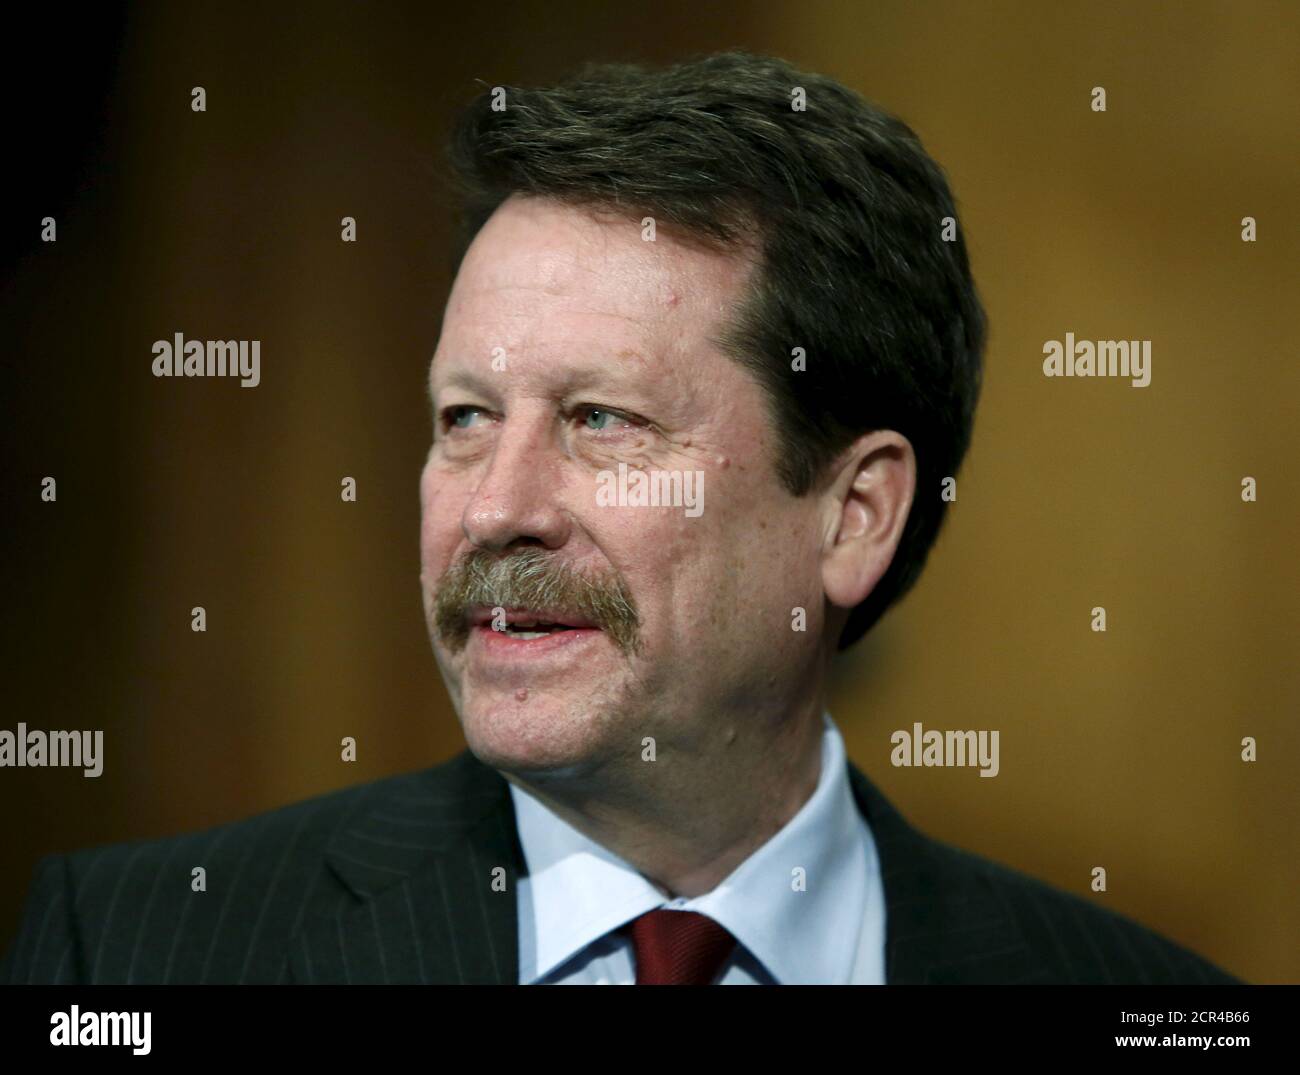 Food and Drug Administration Commissioner nominee Doctor Robert Califf testifies at his nomination hearing at the Senate Health, Education, Labor and Pensions Committee on Capitol Hill in Washington, November 17, 2015. REUTERS/Gary Cameron Stock Photo